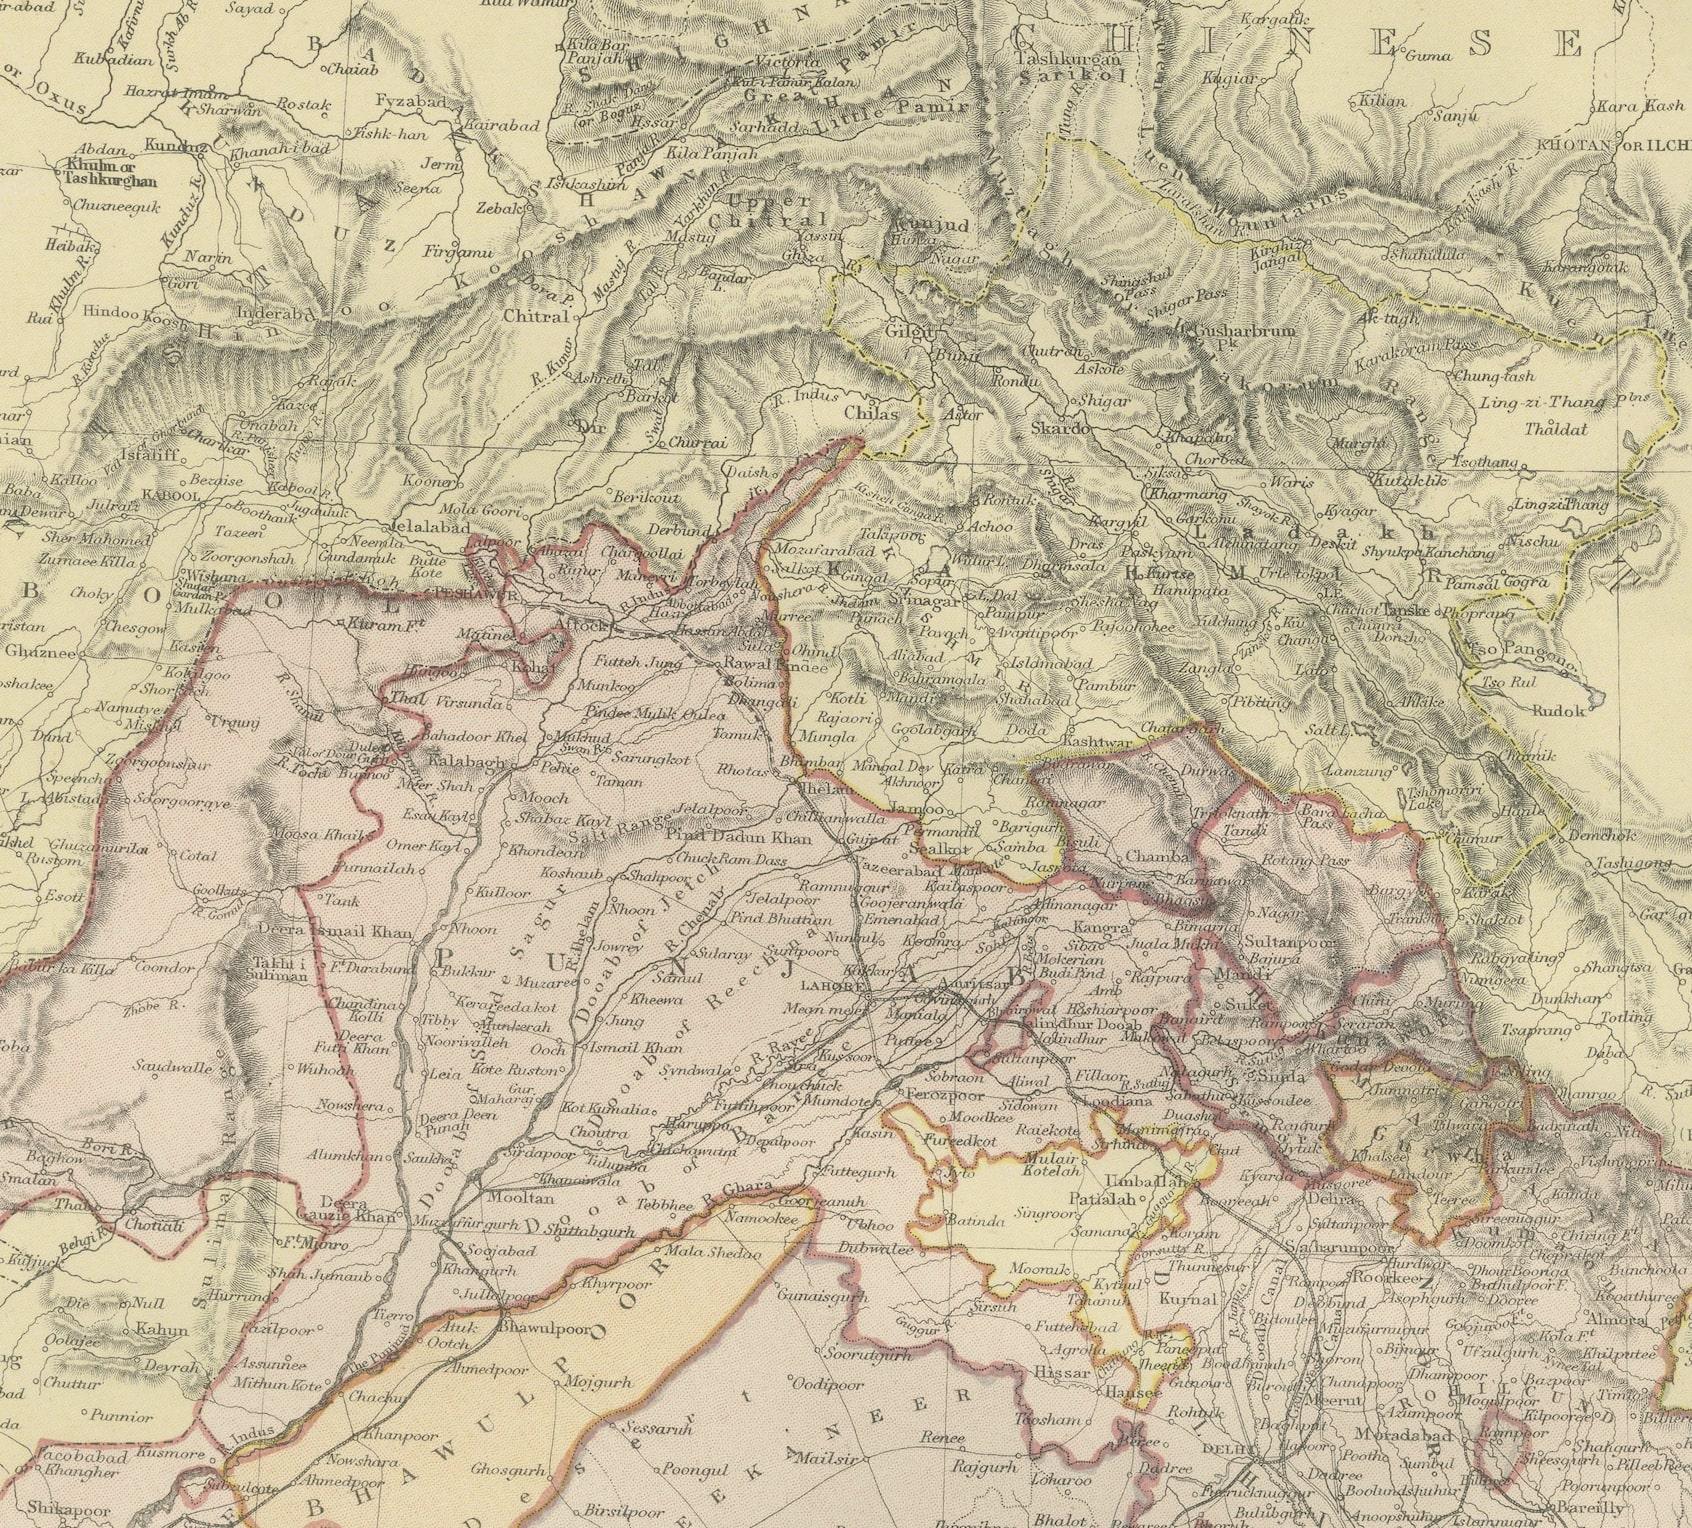 Paper Cartographic Elegance: The British Raj's India, 1882 Atlas by Blackie and Son For Sale